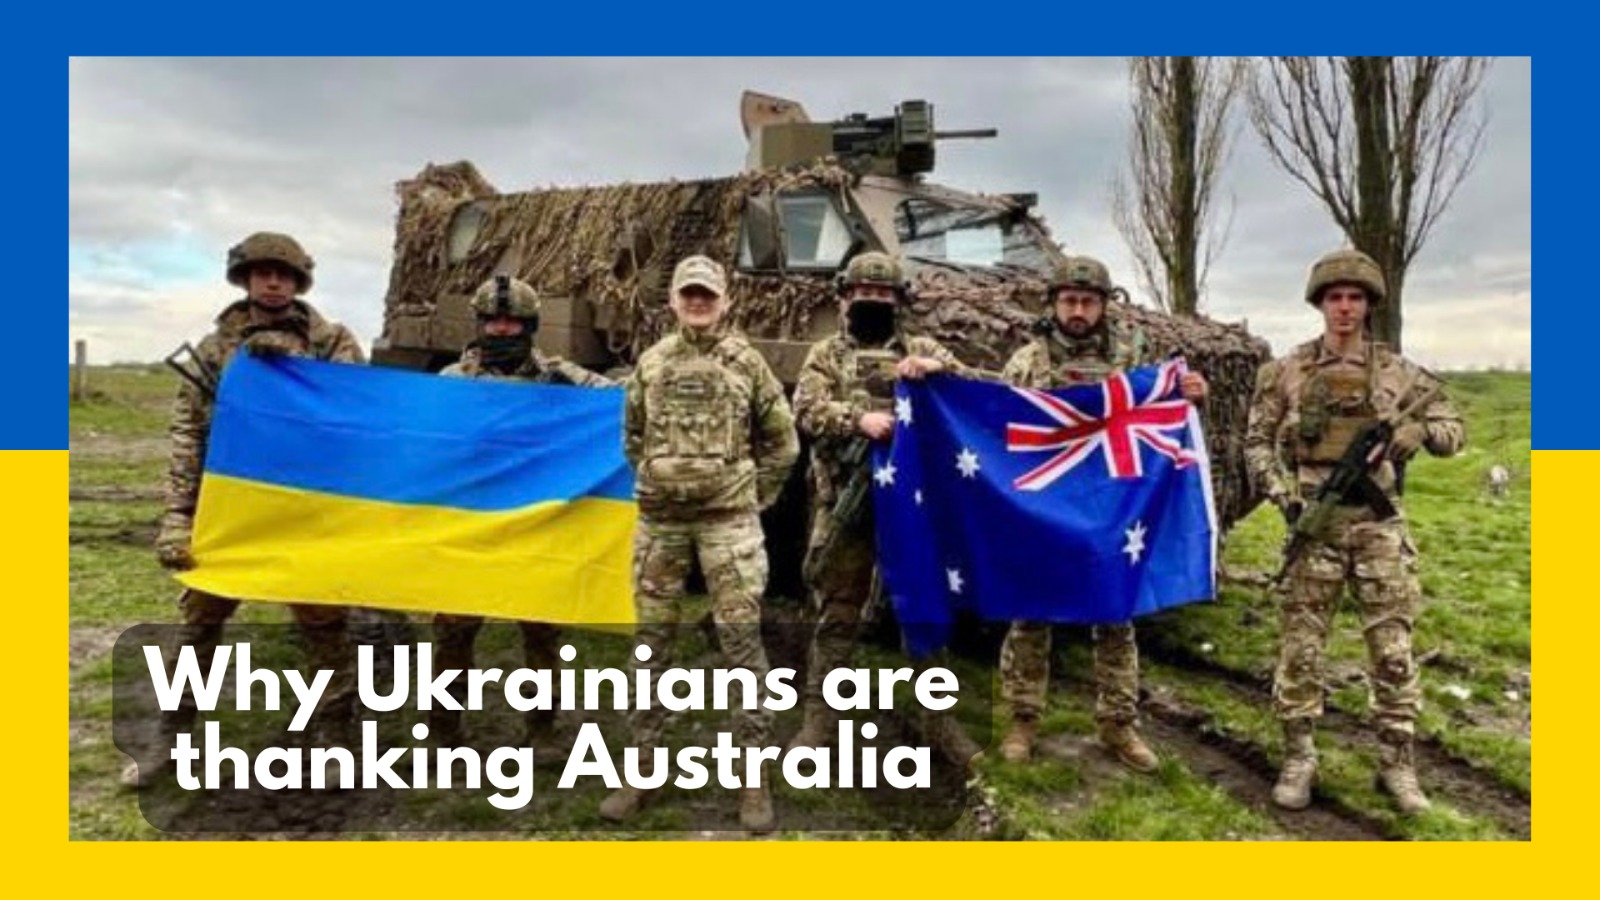 Thank You Australia: A Story of Solidarity with Ukraine